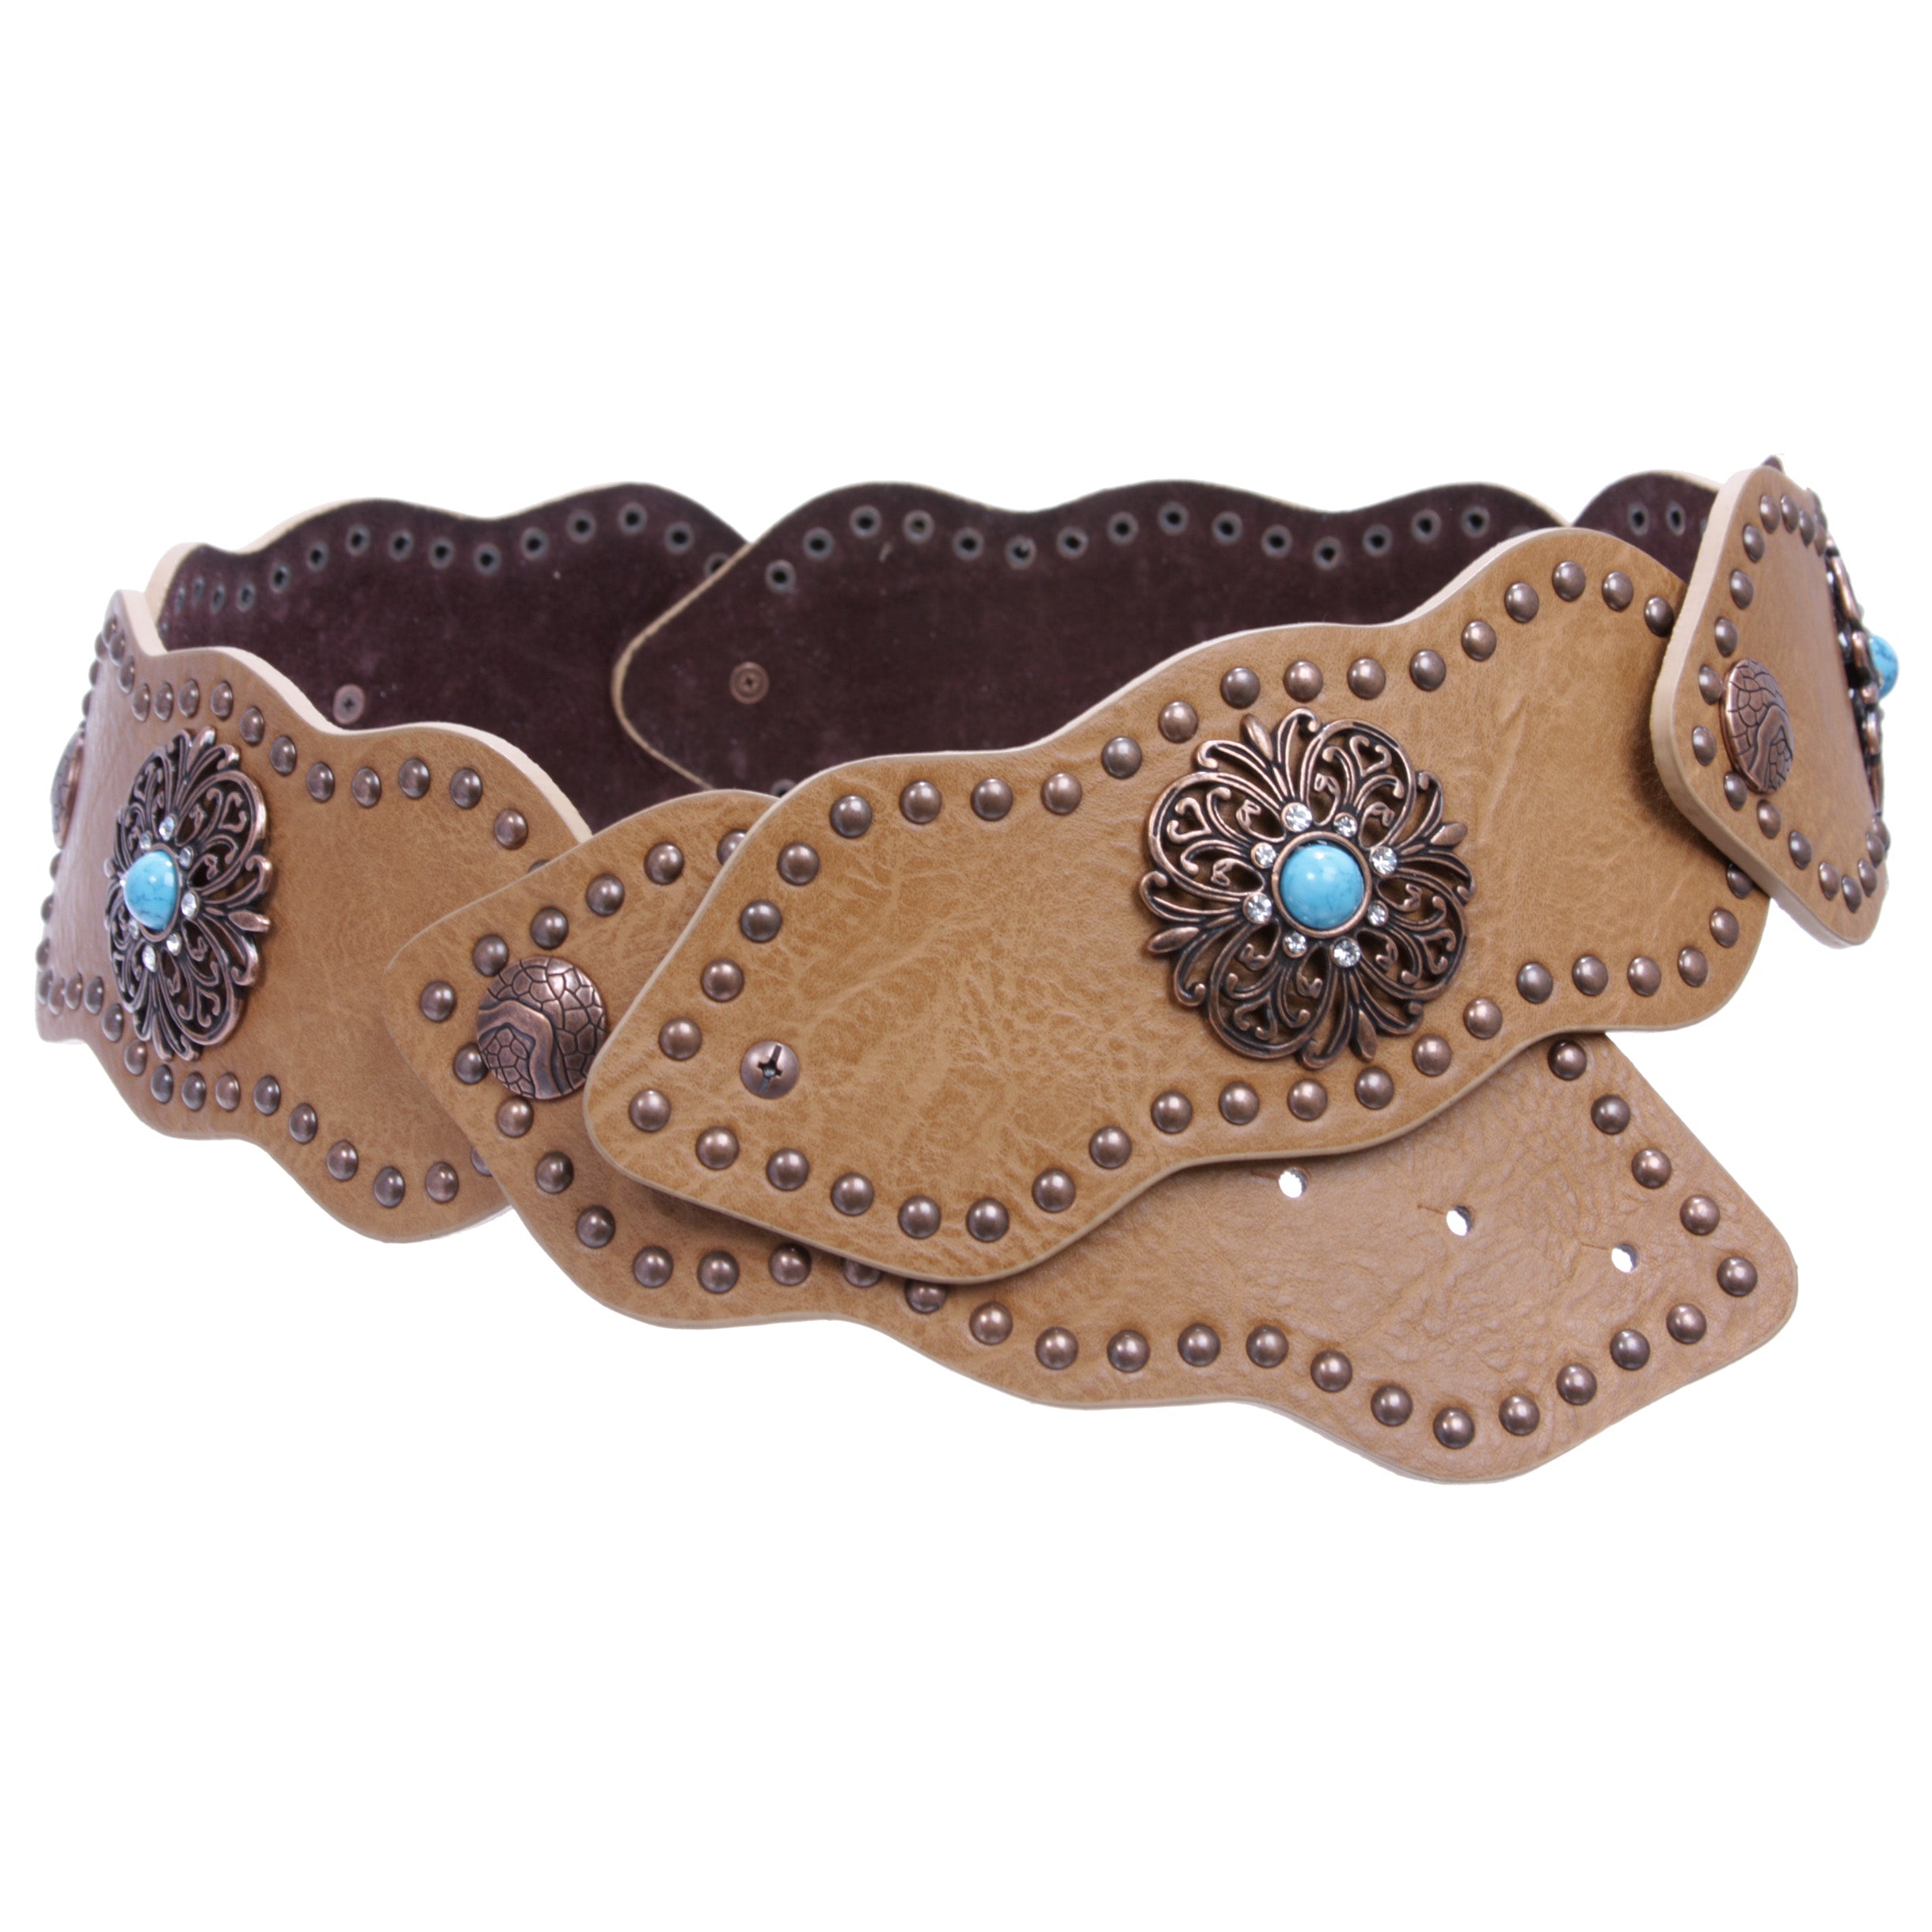 Women's 3" (75mm) Wide Boho Link Turquoise Silver Studded Leather Belt